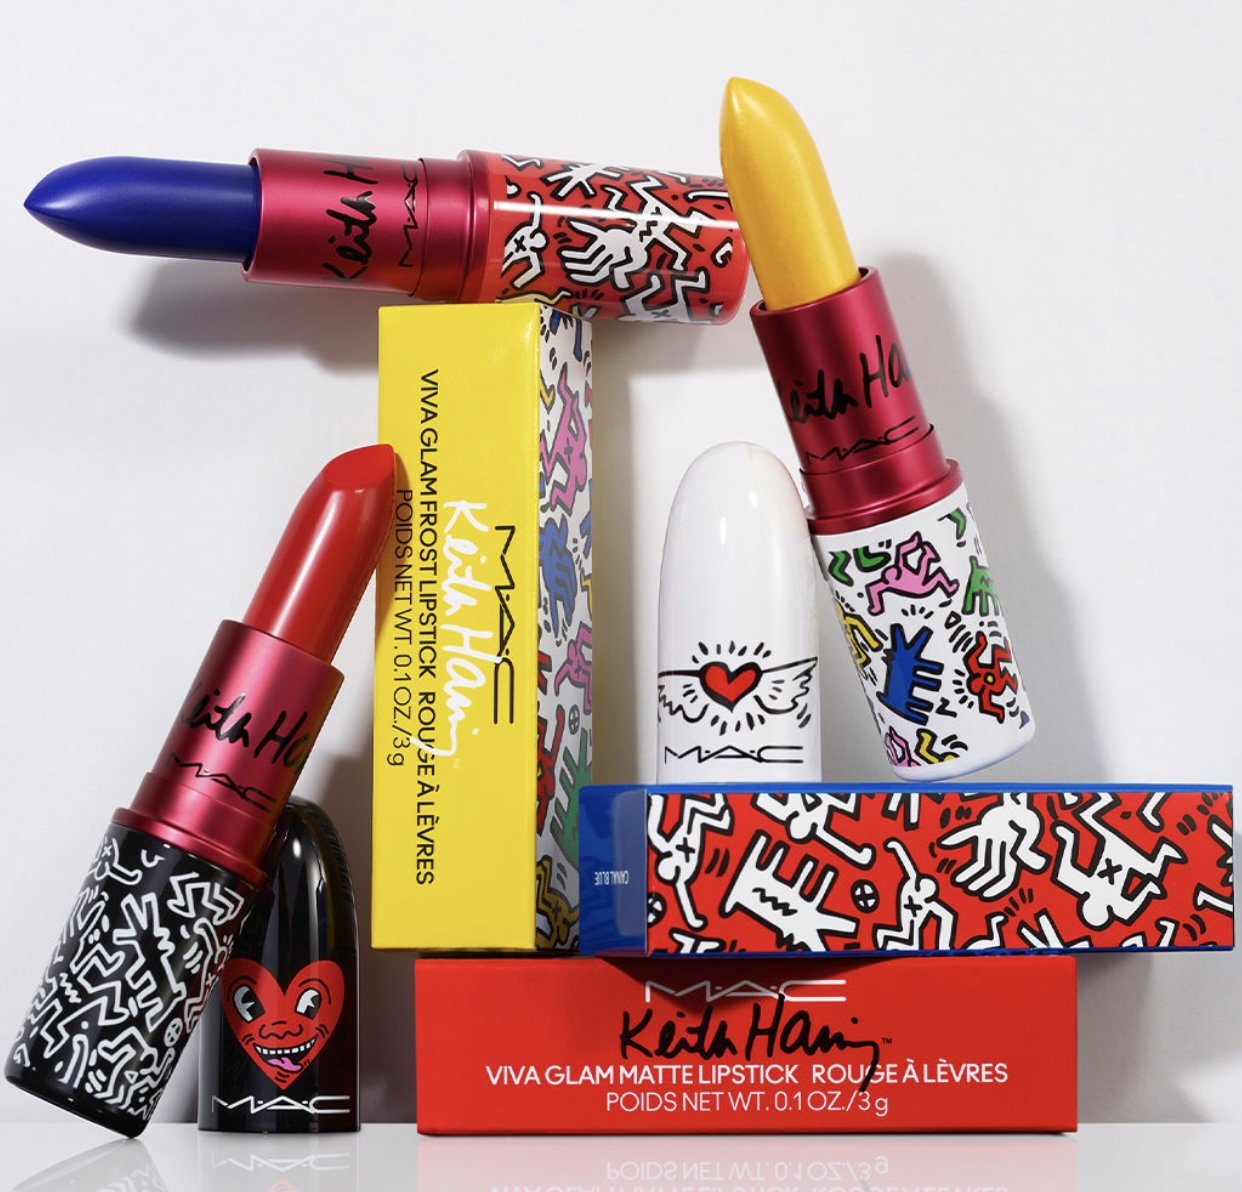 Shiseido's My Crayon Project - Campaign